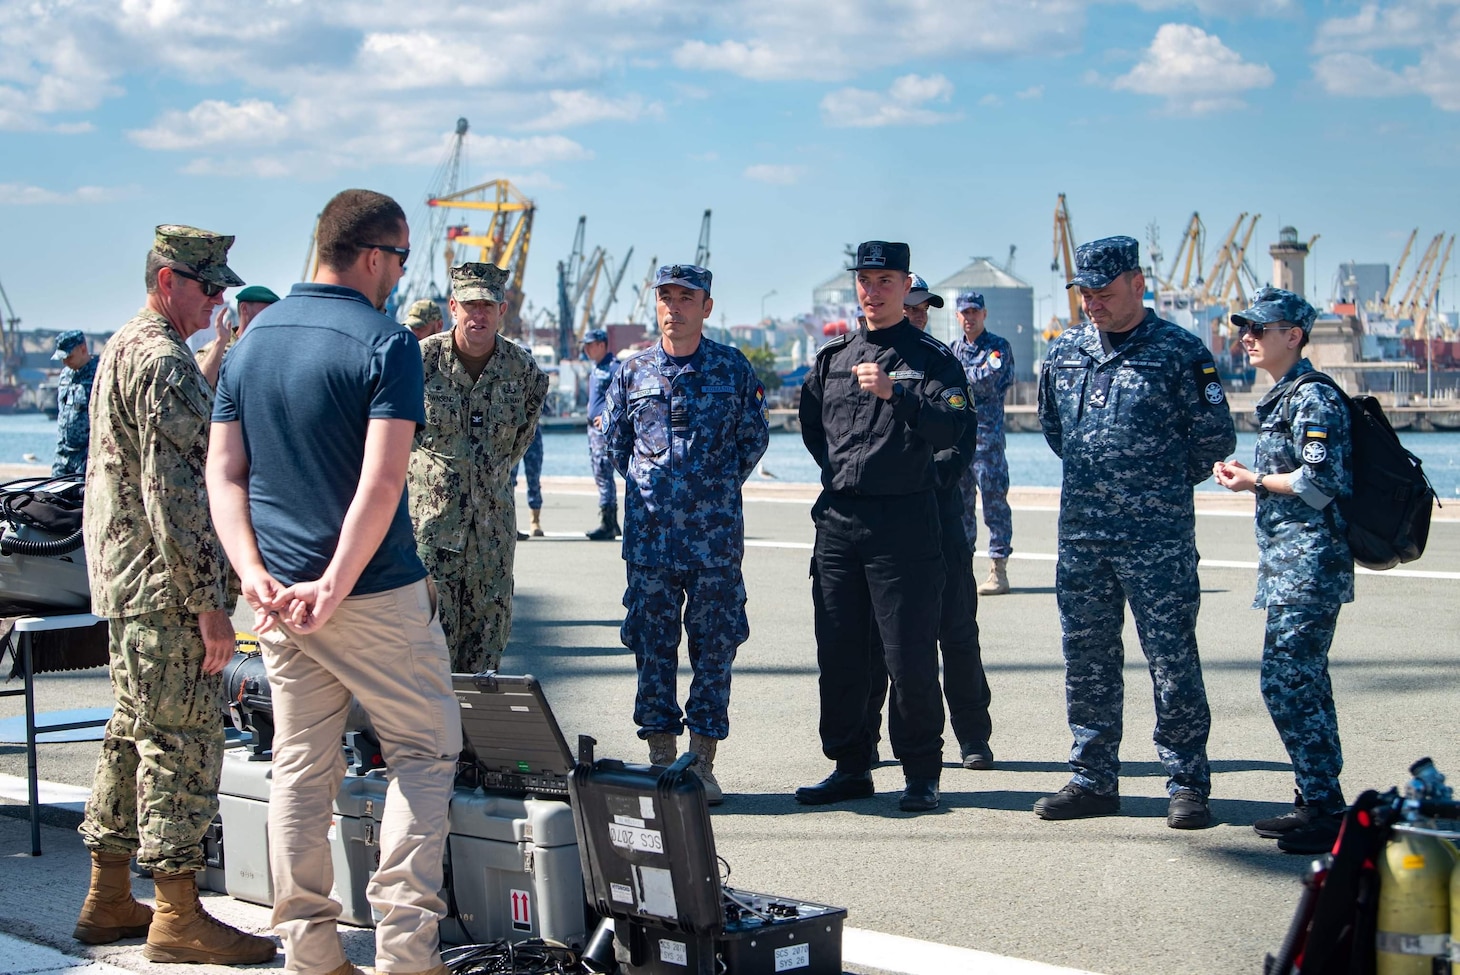 Sea Breeze 2023-3 is scheduled to run from Sept. 11-15, 2023, in Constanta, Romania. This is a land and sea-based exercise with multinational Allies and Partners, aimed to enhance the capabilities of Black Sea and Partnership for Peace maritime security forces while progressively training and preparing the Ukraine Maritime Command staff.